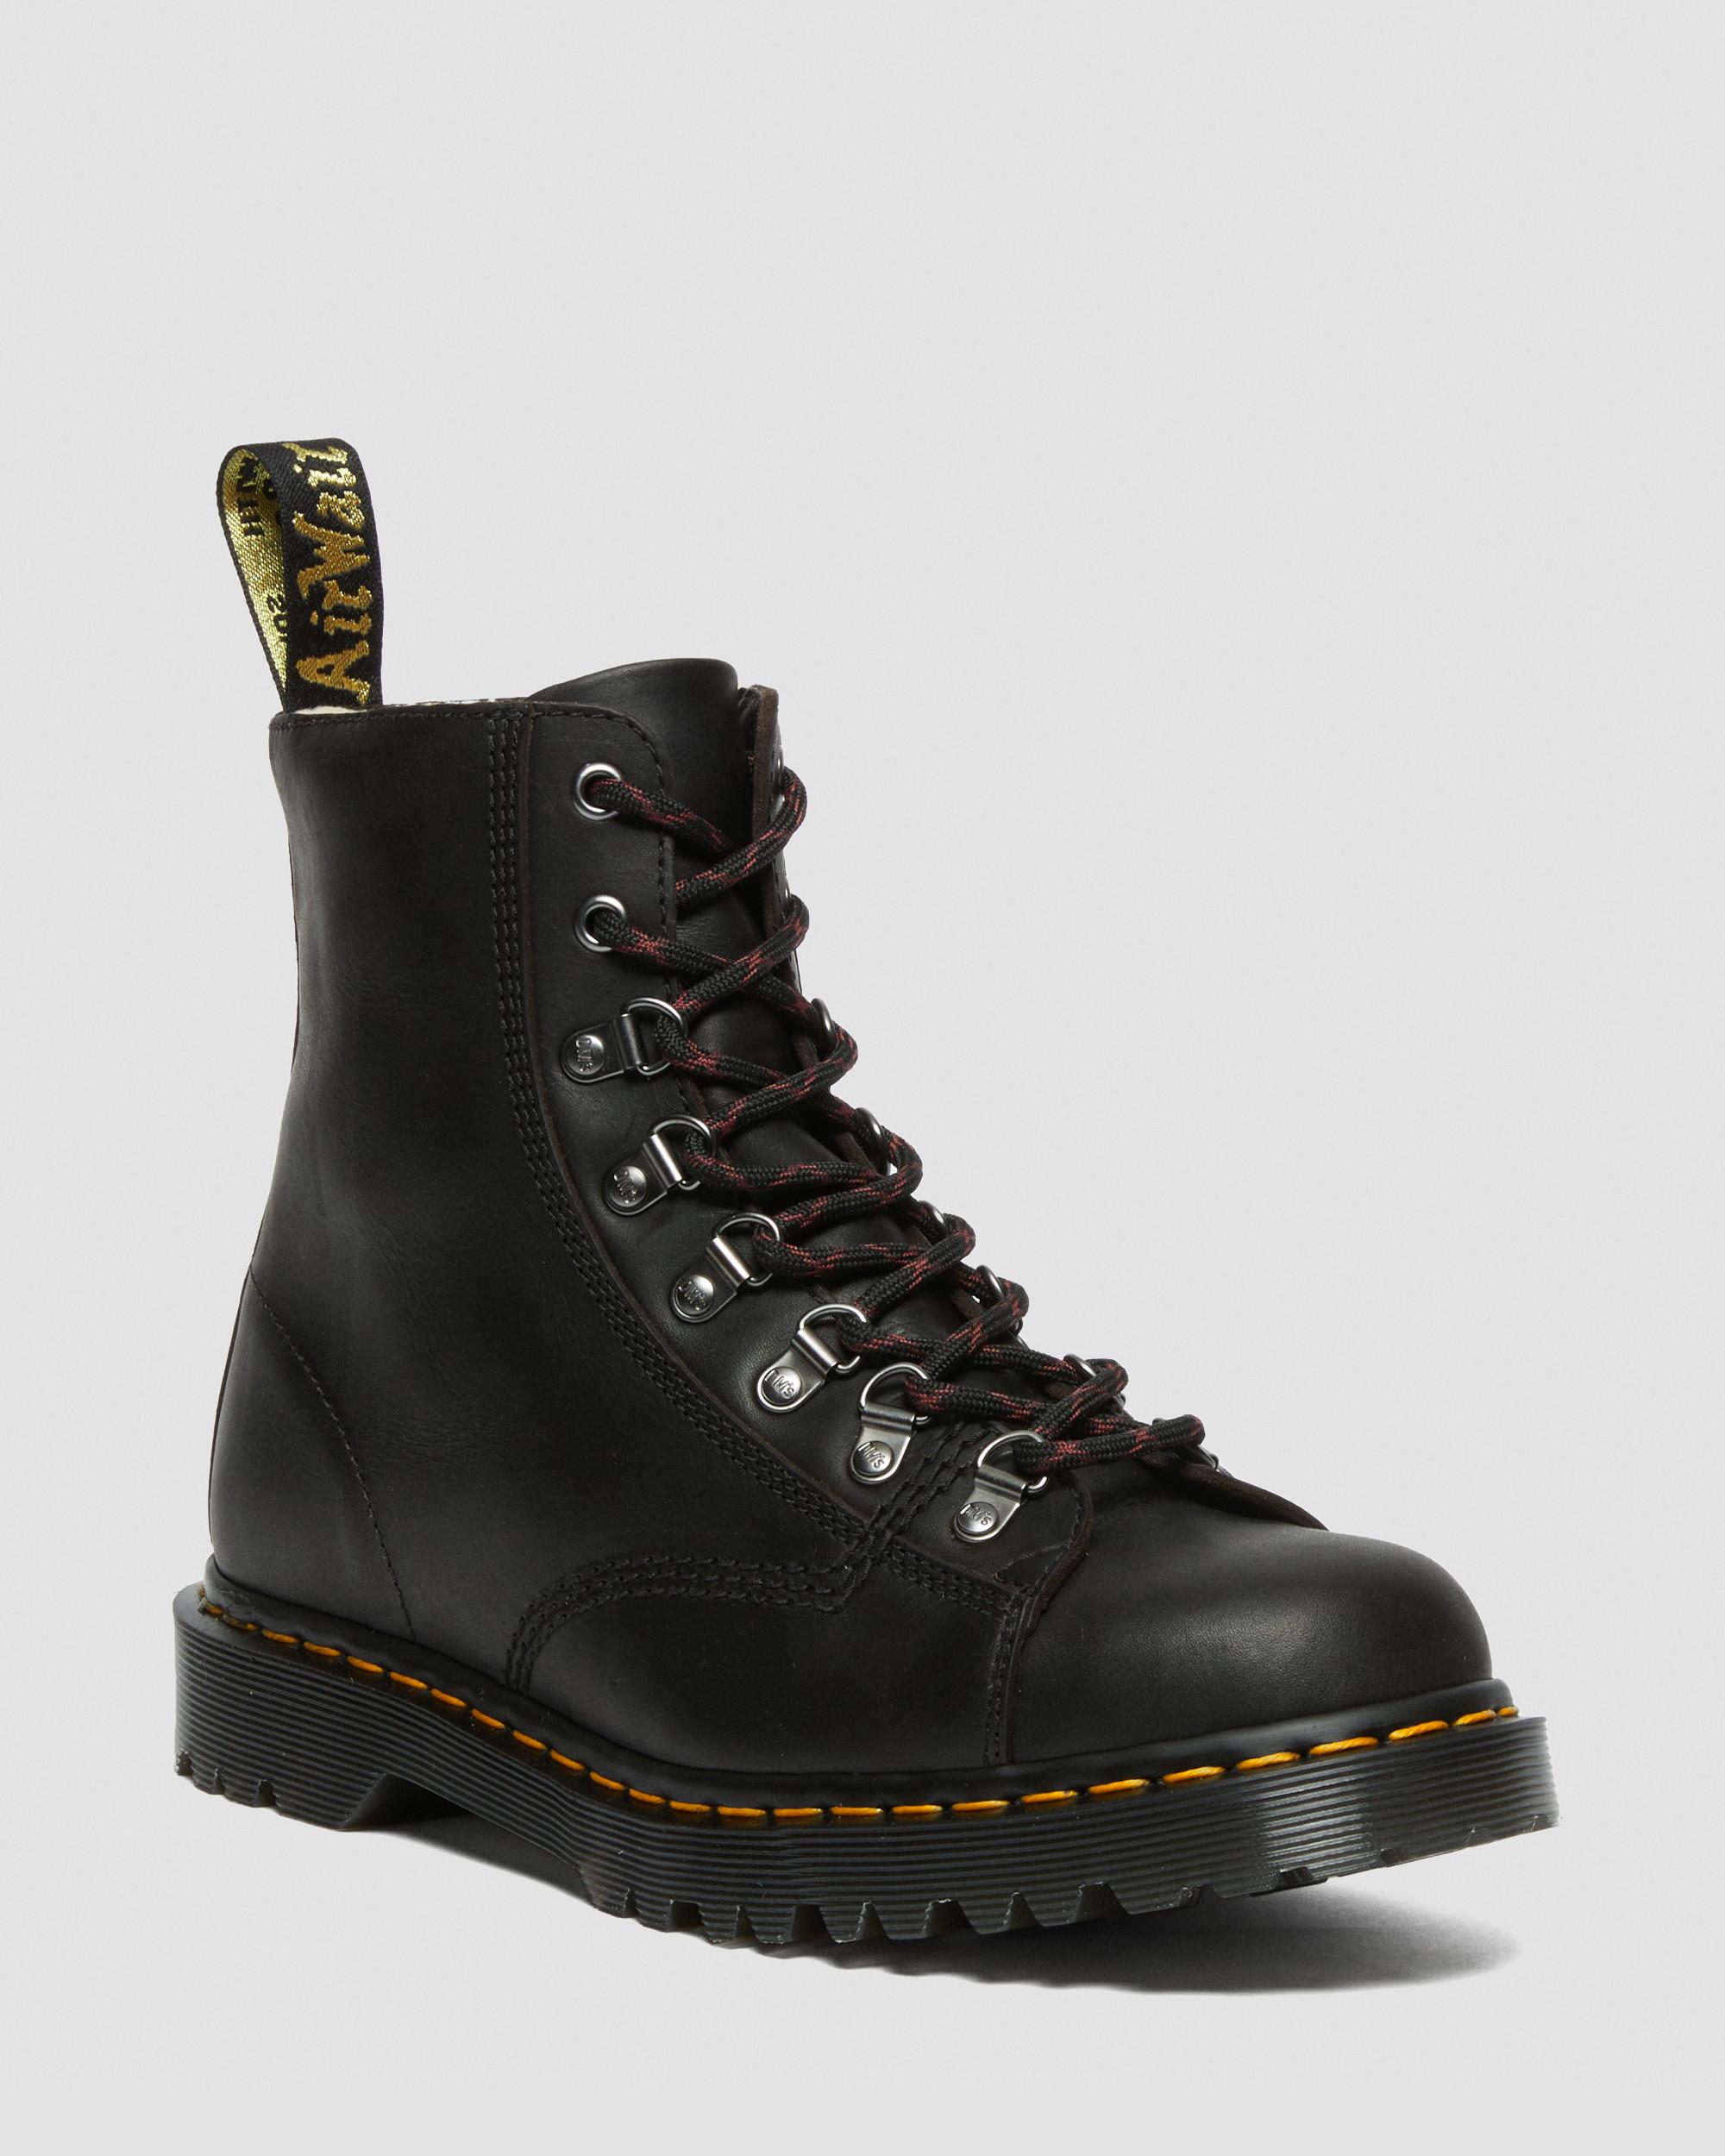 Barton Made in England Classic Oil Leather Boots in Black | Dr. Martens